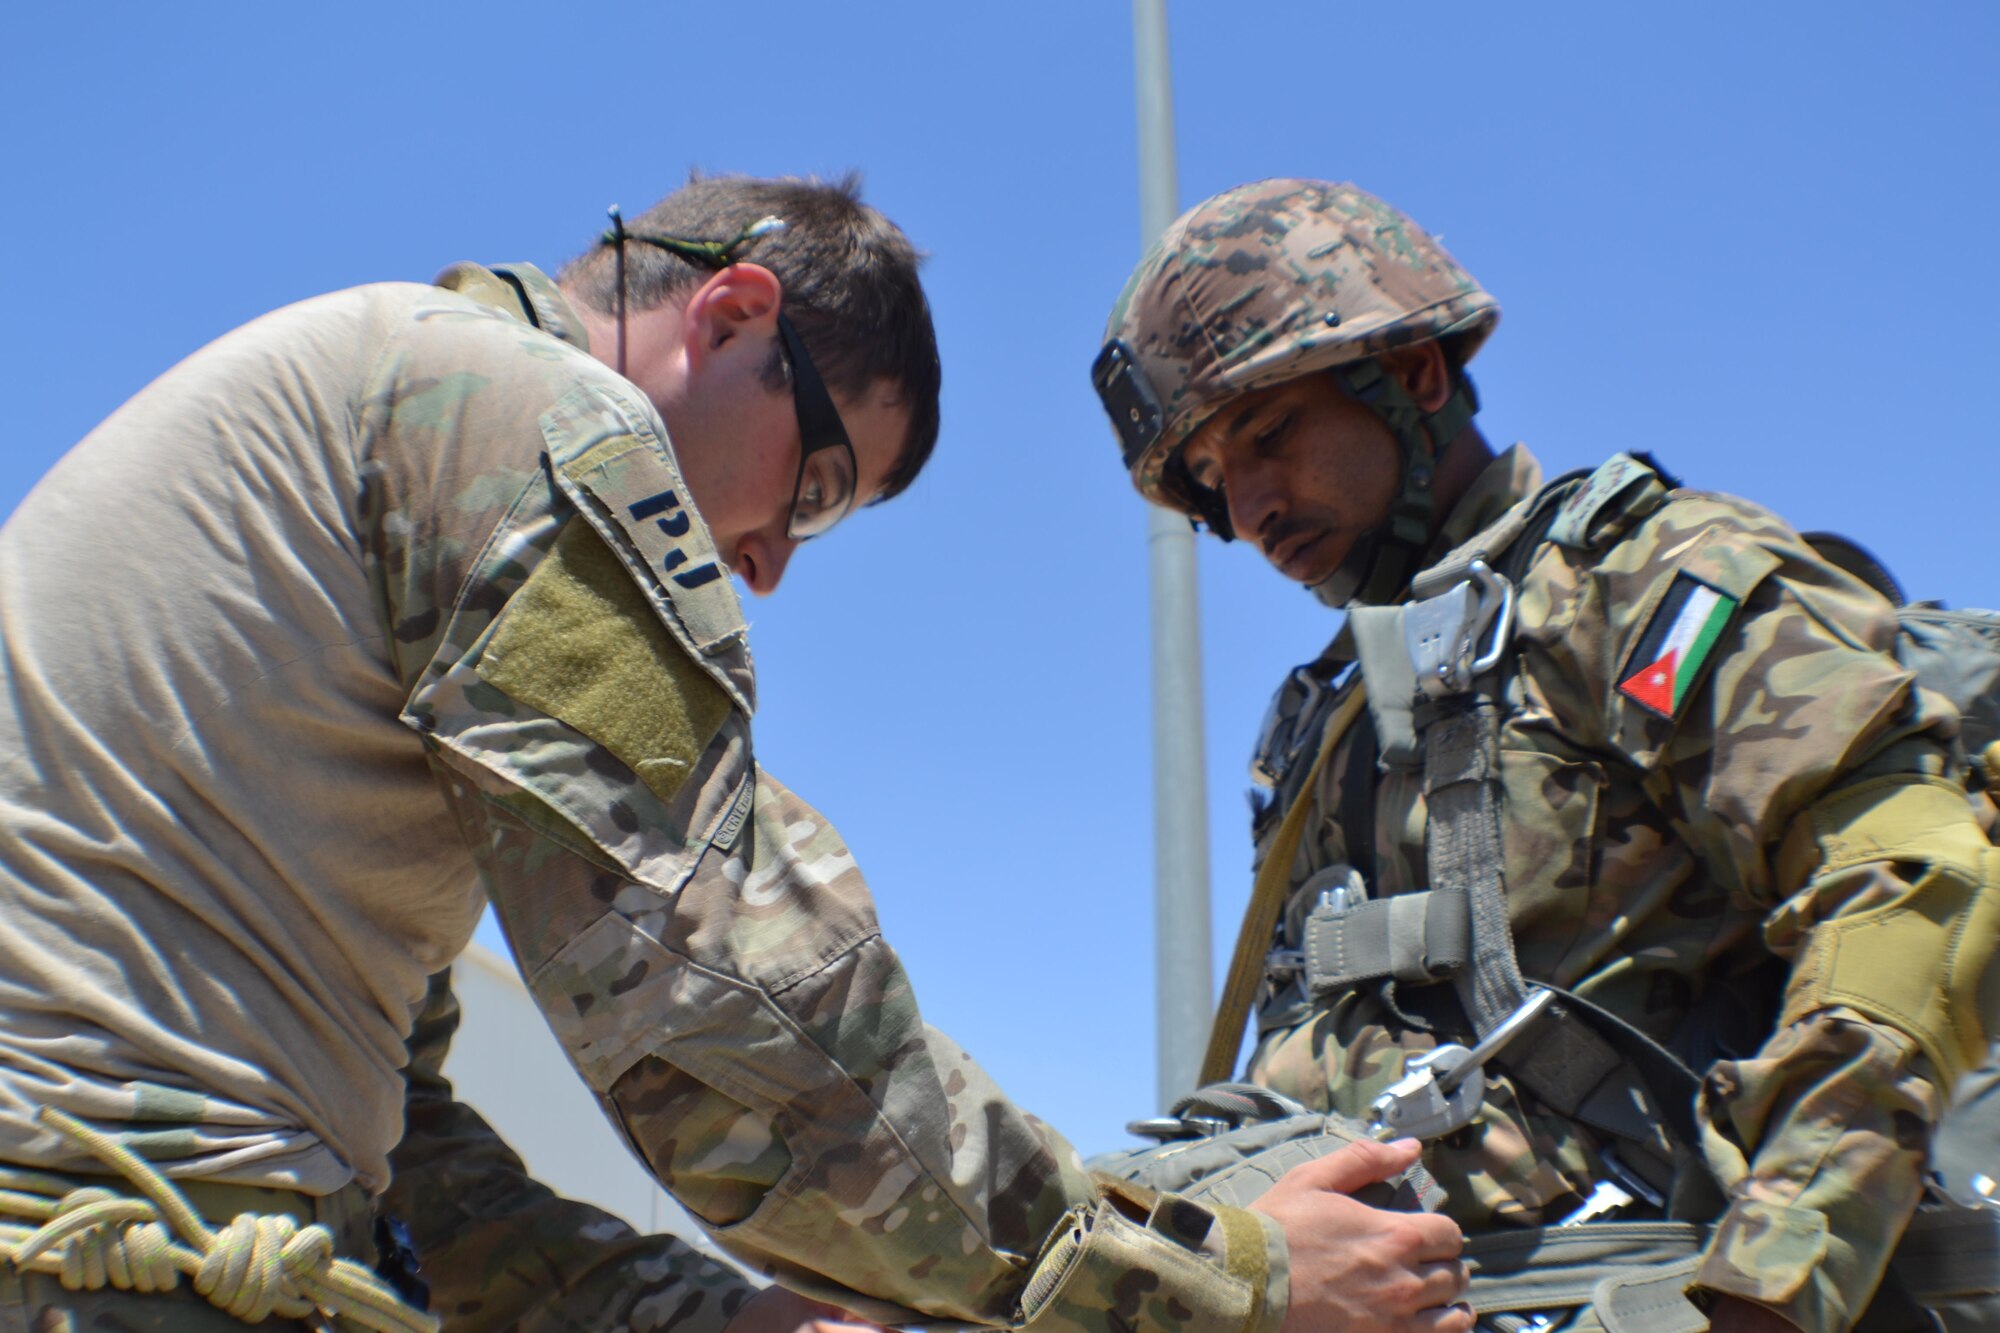 U.S. Air Force Special Tactics teams train with Jordanian special operations forces in personnel recovery techniques during Eager Lion 2016. This is one of the first times Special Tactics provided command and control of an exercise joint-task force, directing U.S. Army and Jordanian SOF teams in
 Air Force ground missions such as personnel recovery and precision strike. Exercise Eager Lion 2016 consisted of simulated real-world scenarios to facilitate a coordinated partnered military response to conventional and
 unconventional threats. The addition of this SOF asset enhances U.S. and Jordanian effectiveness and capability to respond to real-world crises and threats. (U.S. Army photo by Maj. Tiffany Collins/Released)
